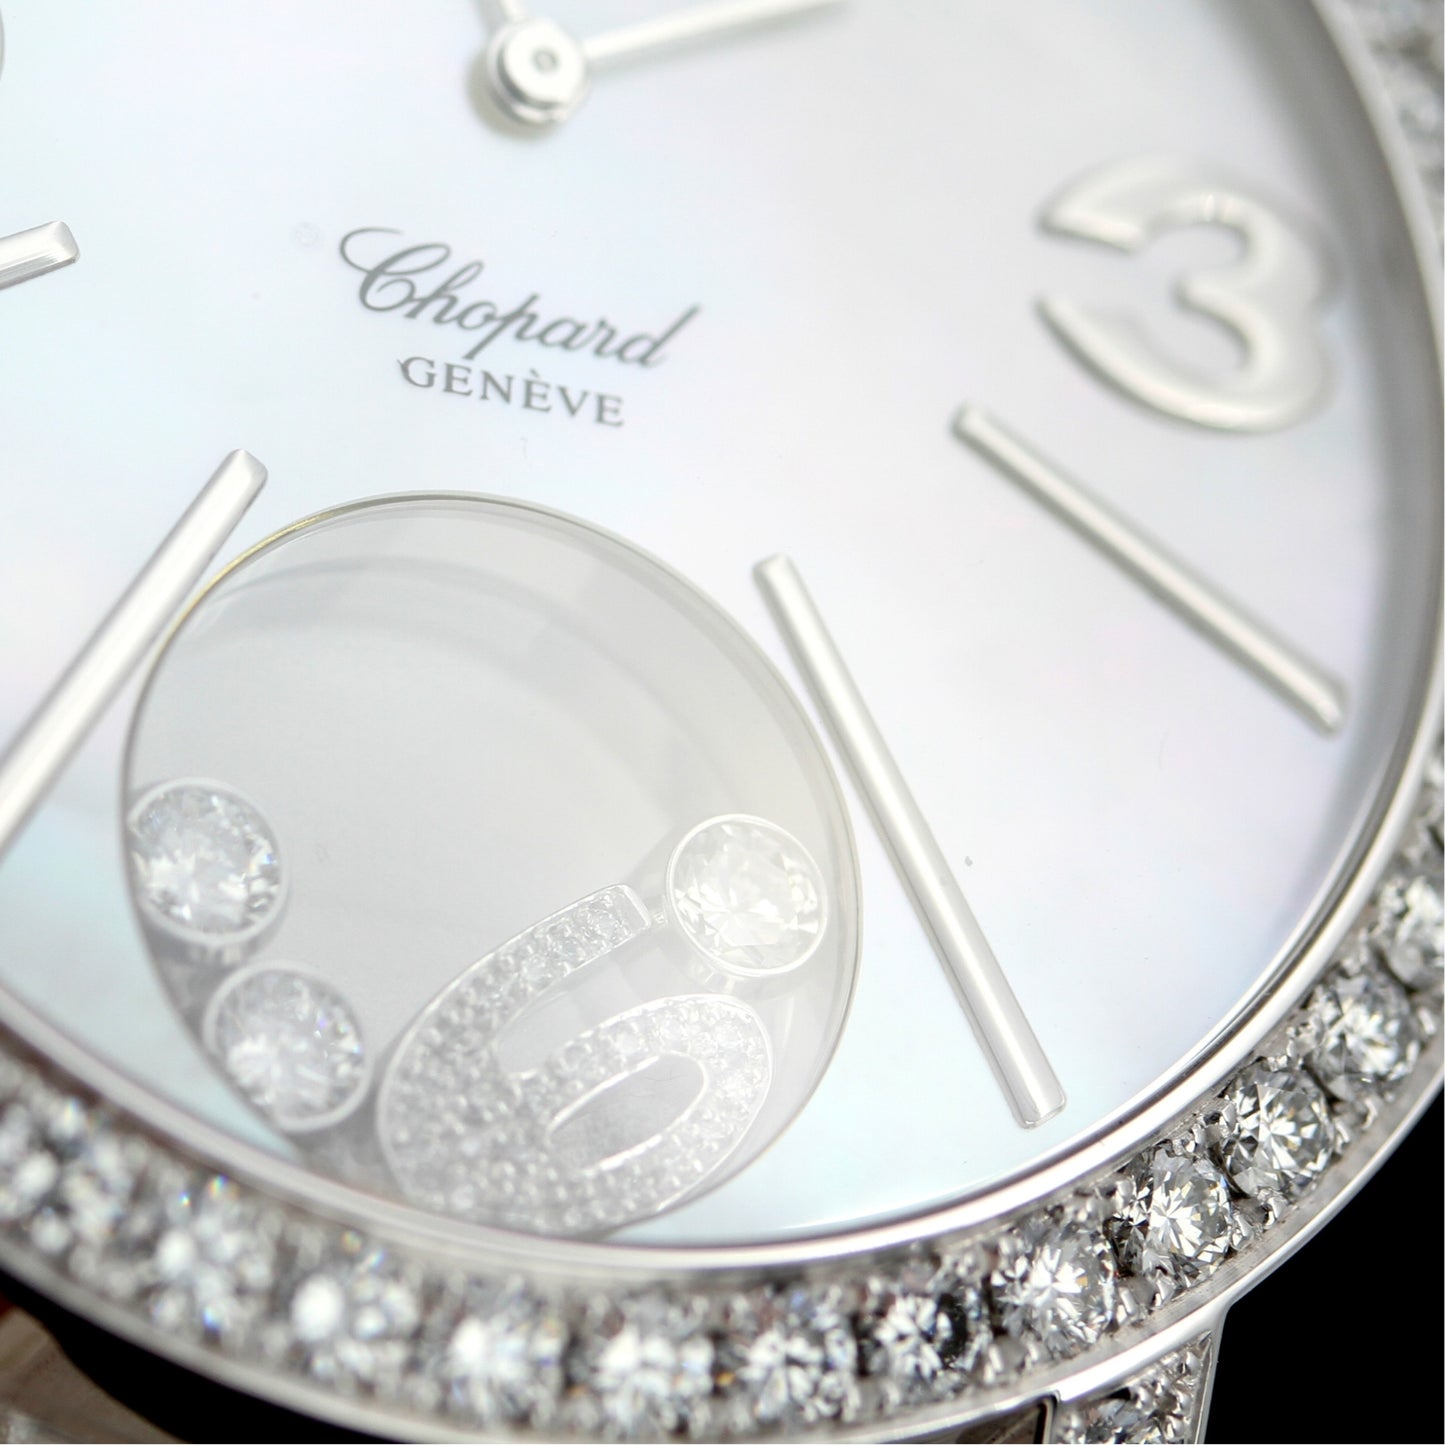 Chopard, Happy Diamonds Happy Time, 55 Diamonds, Mother of Pearl Dial, 207450-1005